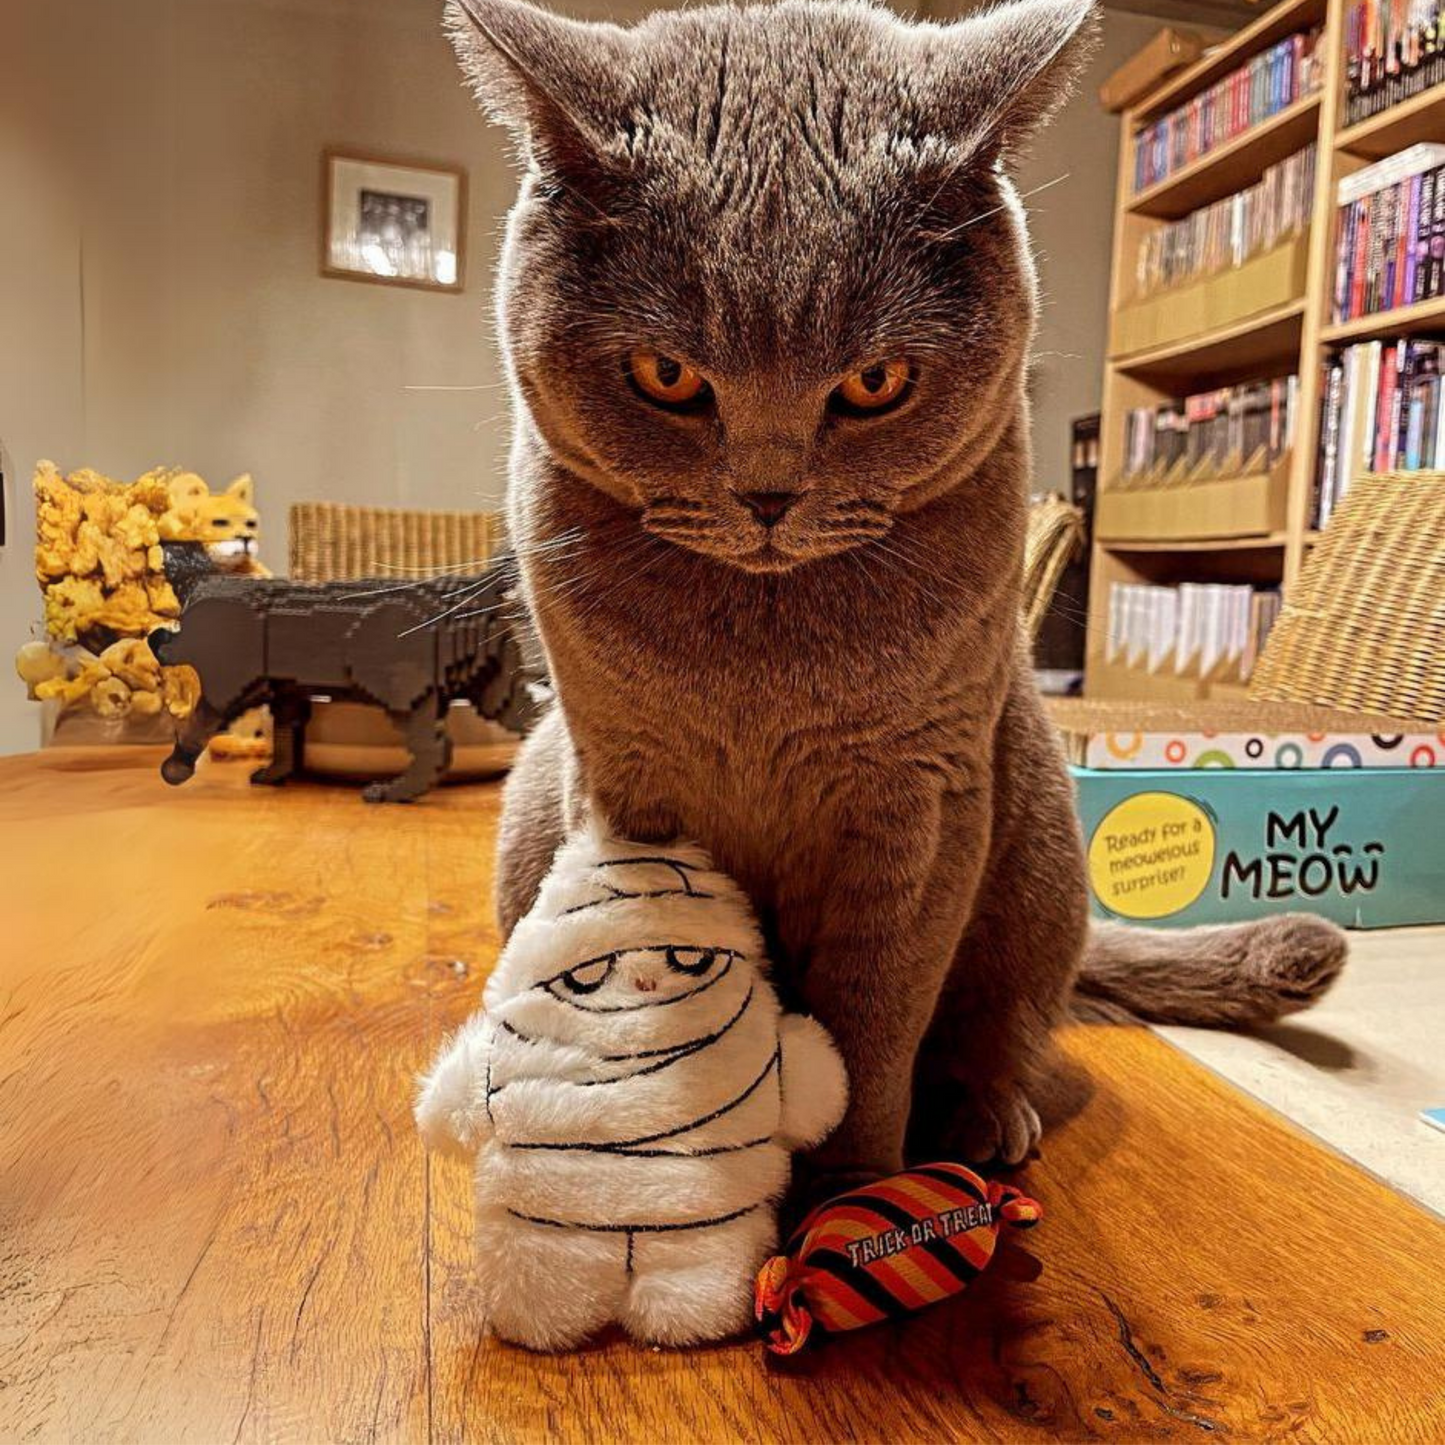 MyMeow Sweet Kitty, Plush Cat Toy with Bell